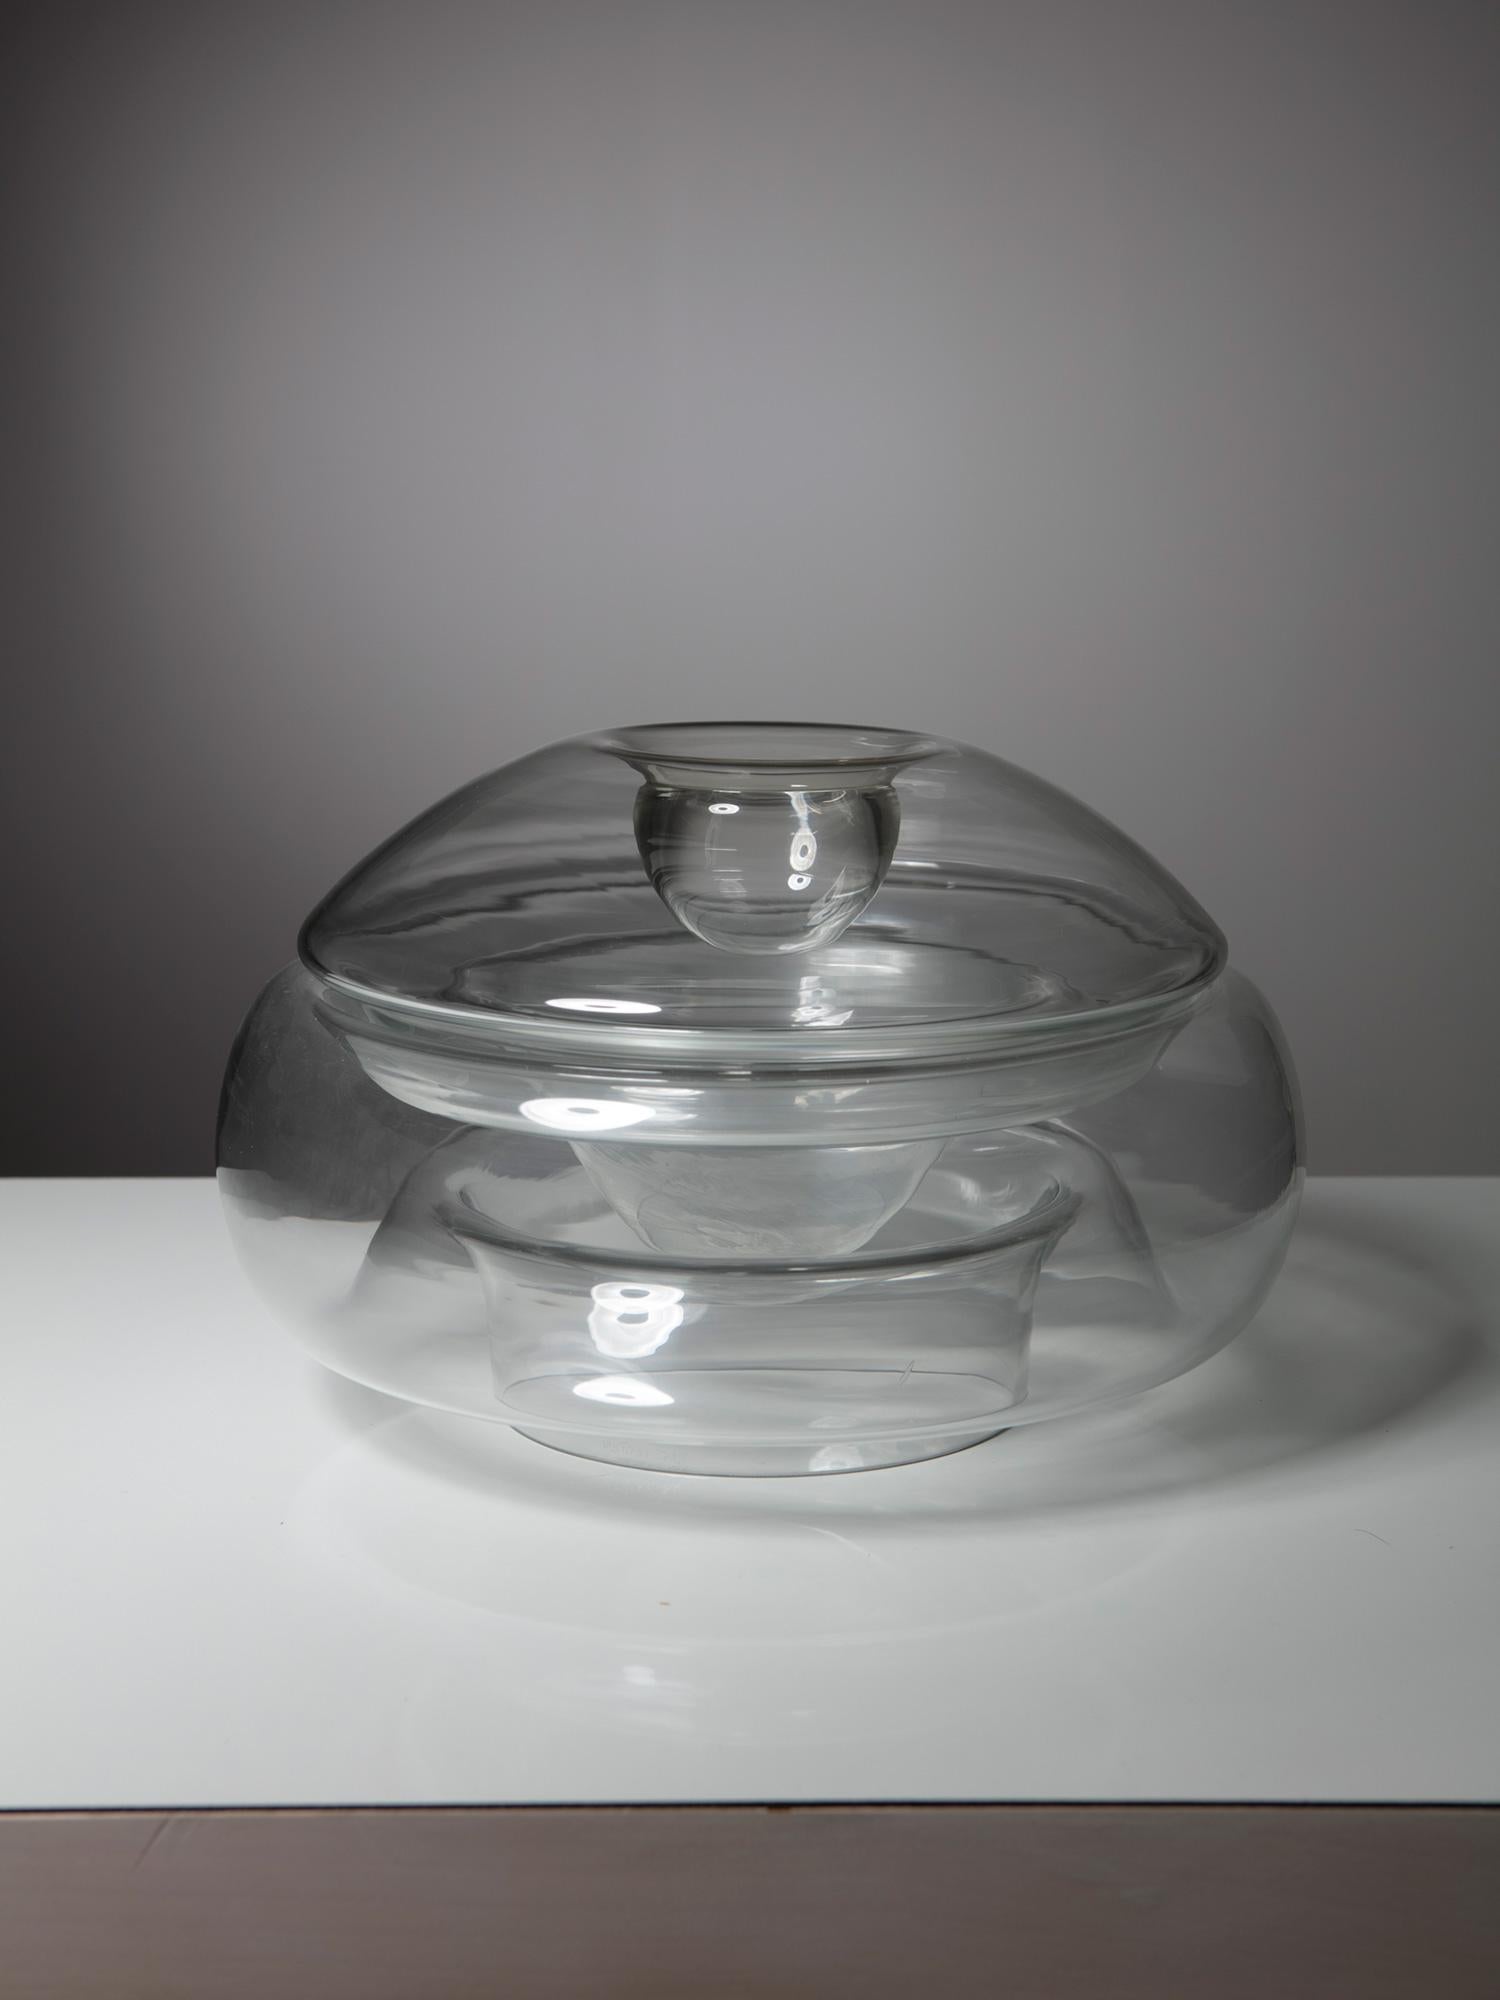 Large glass box by Michael Red for Vistosi.
Two pieces that can also be used separately.